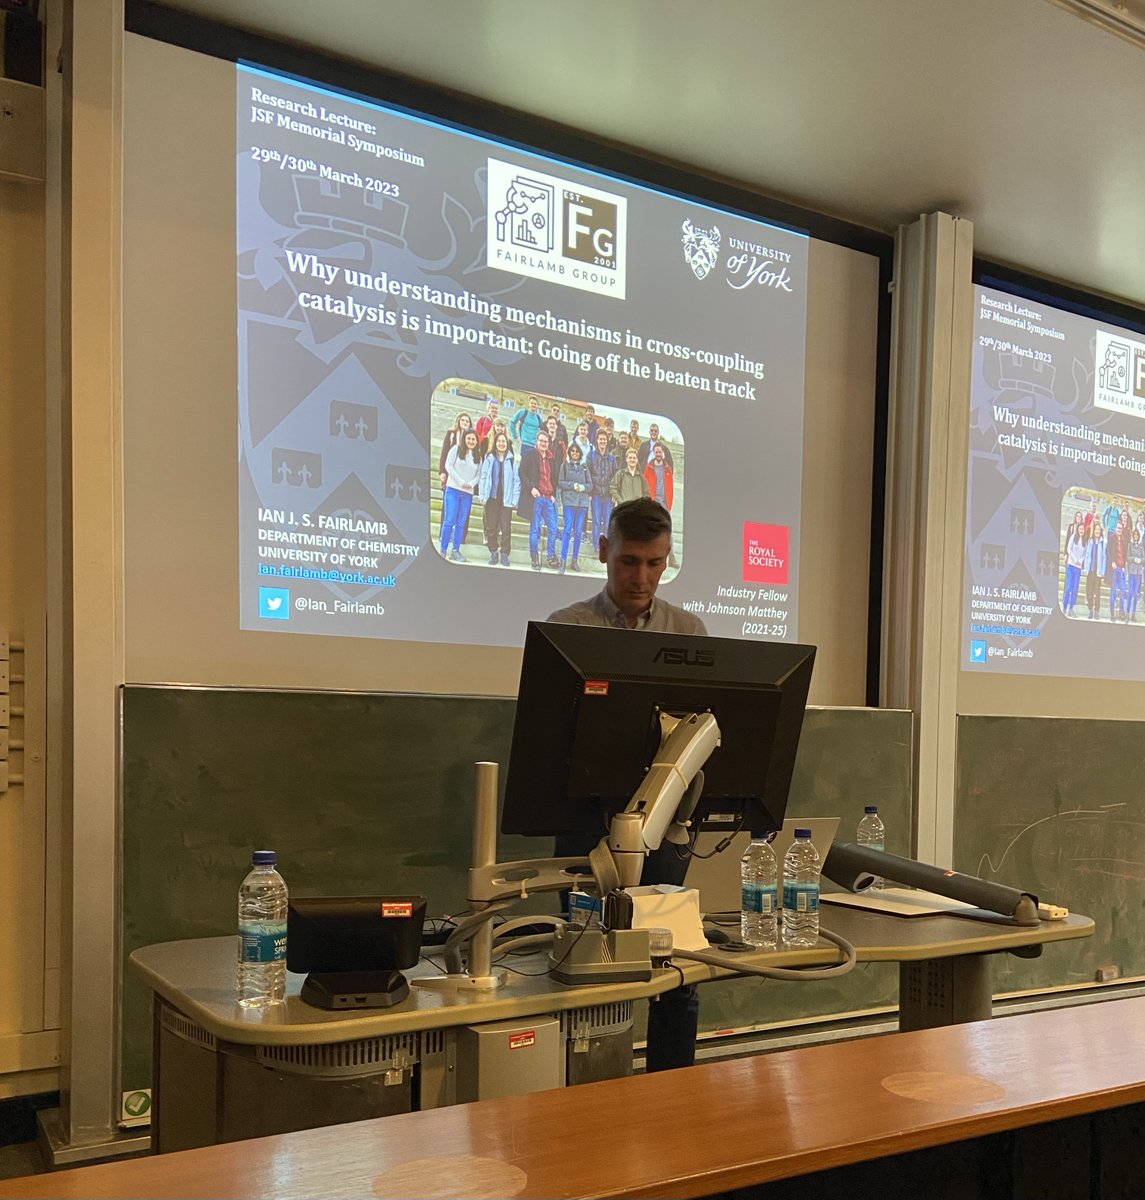 Great to see @Ian_Fairlamb recently presented his group’s research at the University of Birmingham @UoBChemistry as part of the @FosseySymposium in memory of Prof. John S Fossey.